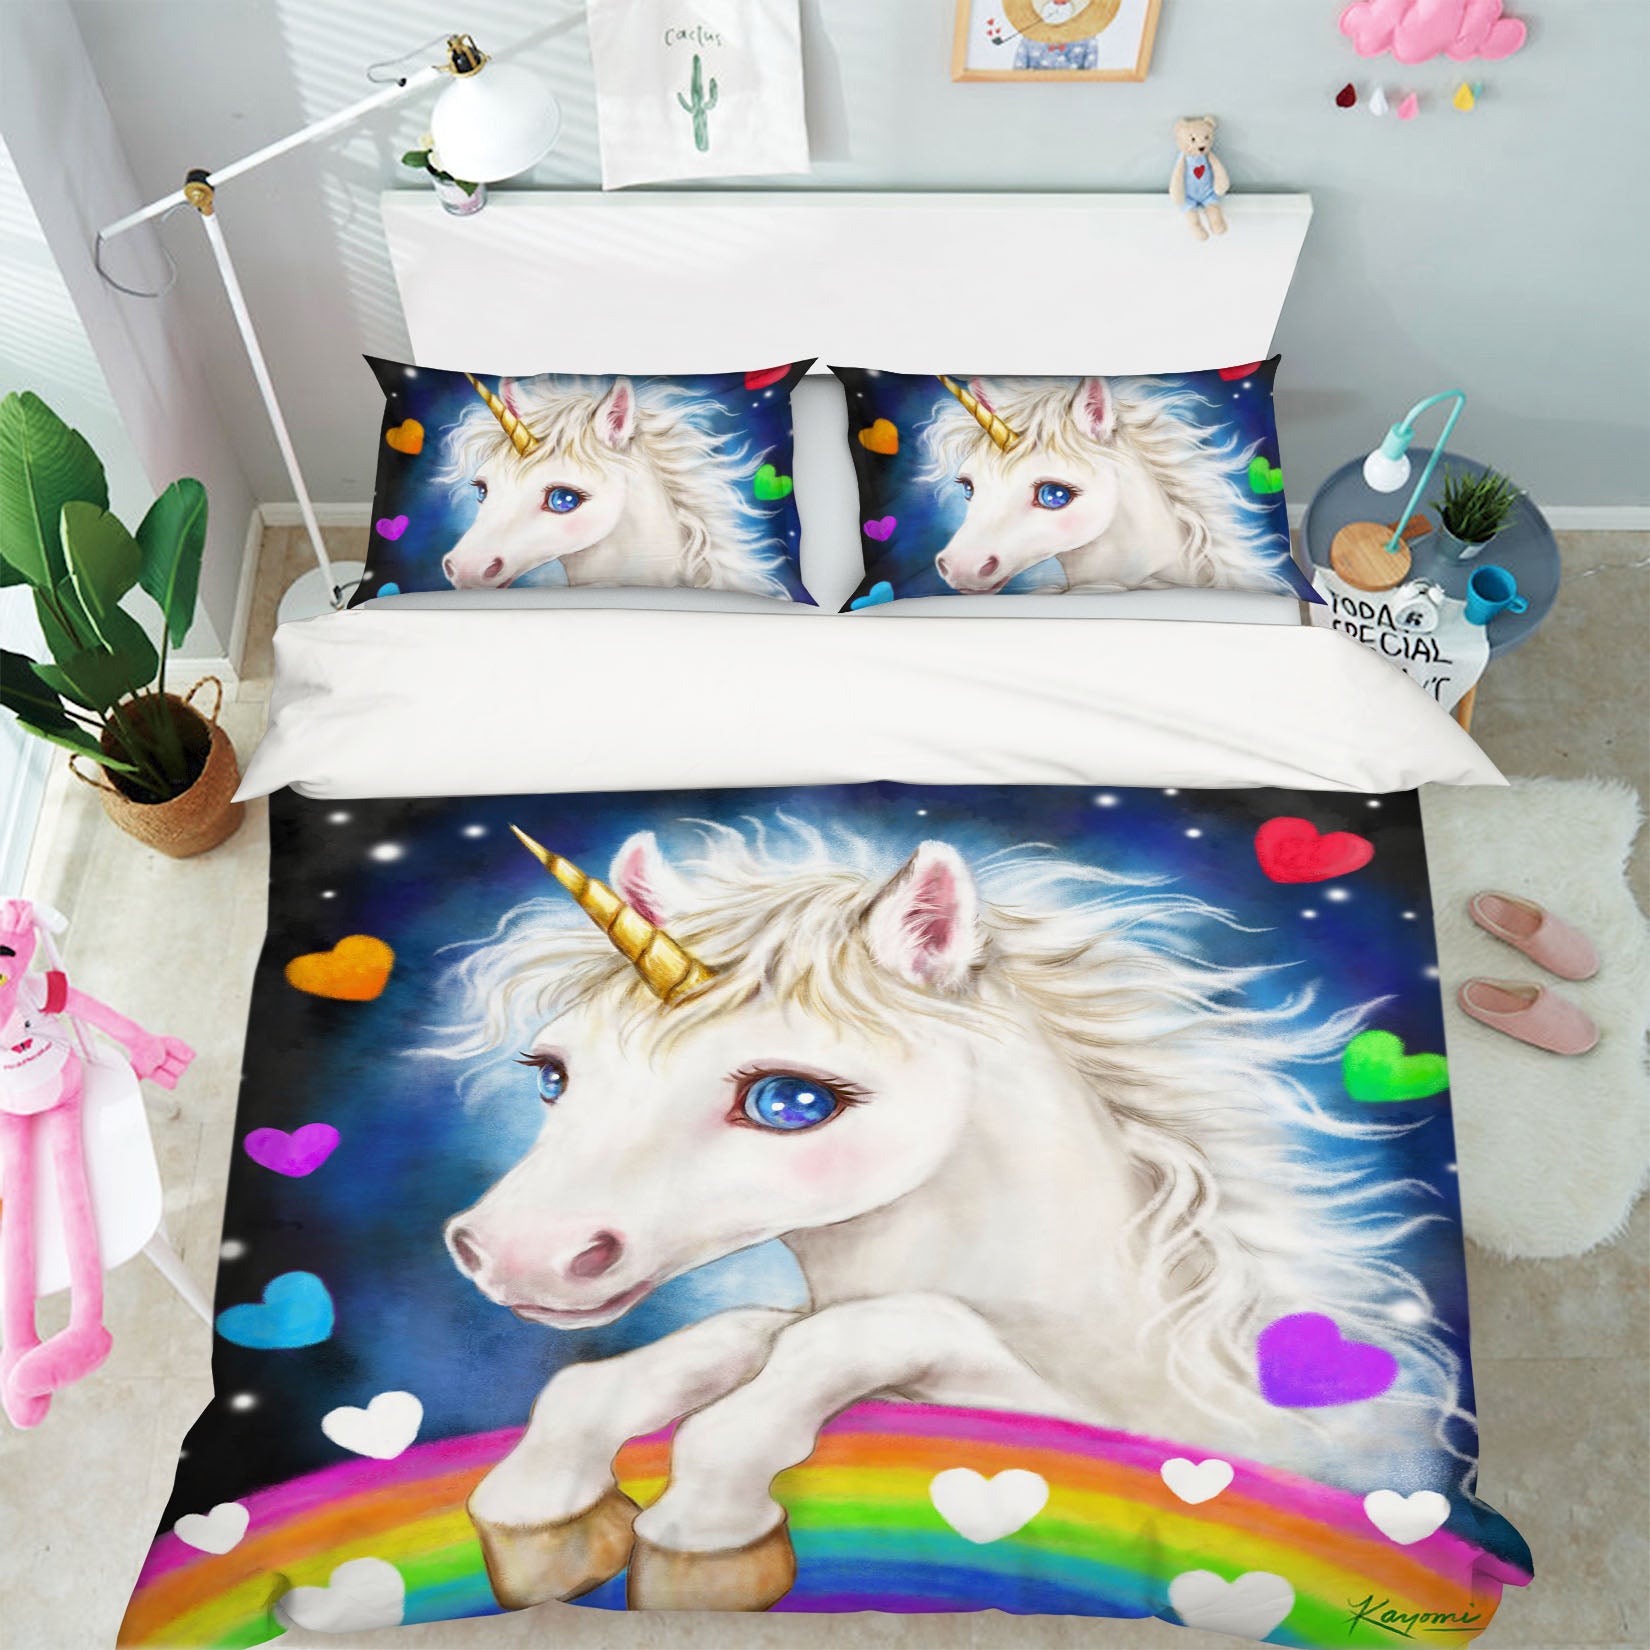 3D Colorful Love Unicorn 5932 Kayomi Harai Bedding Bed Pillowcases Quilt Cover Duvet Cover